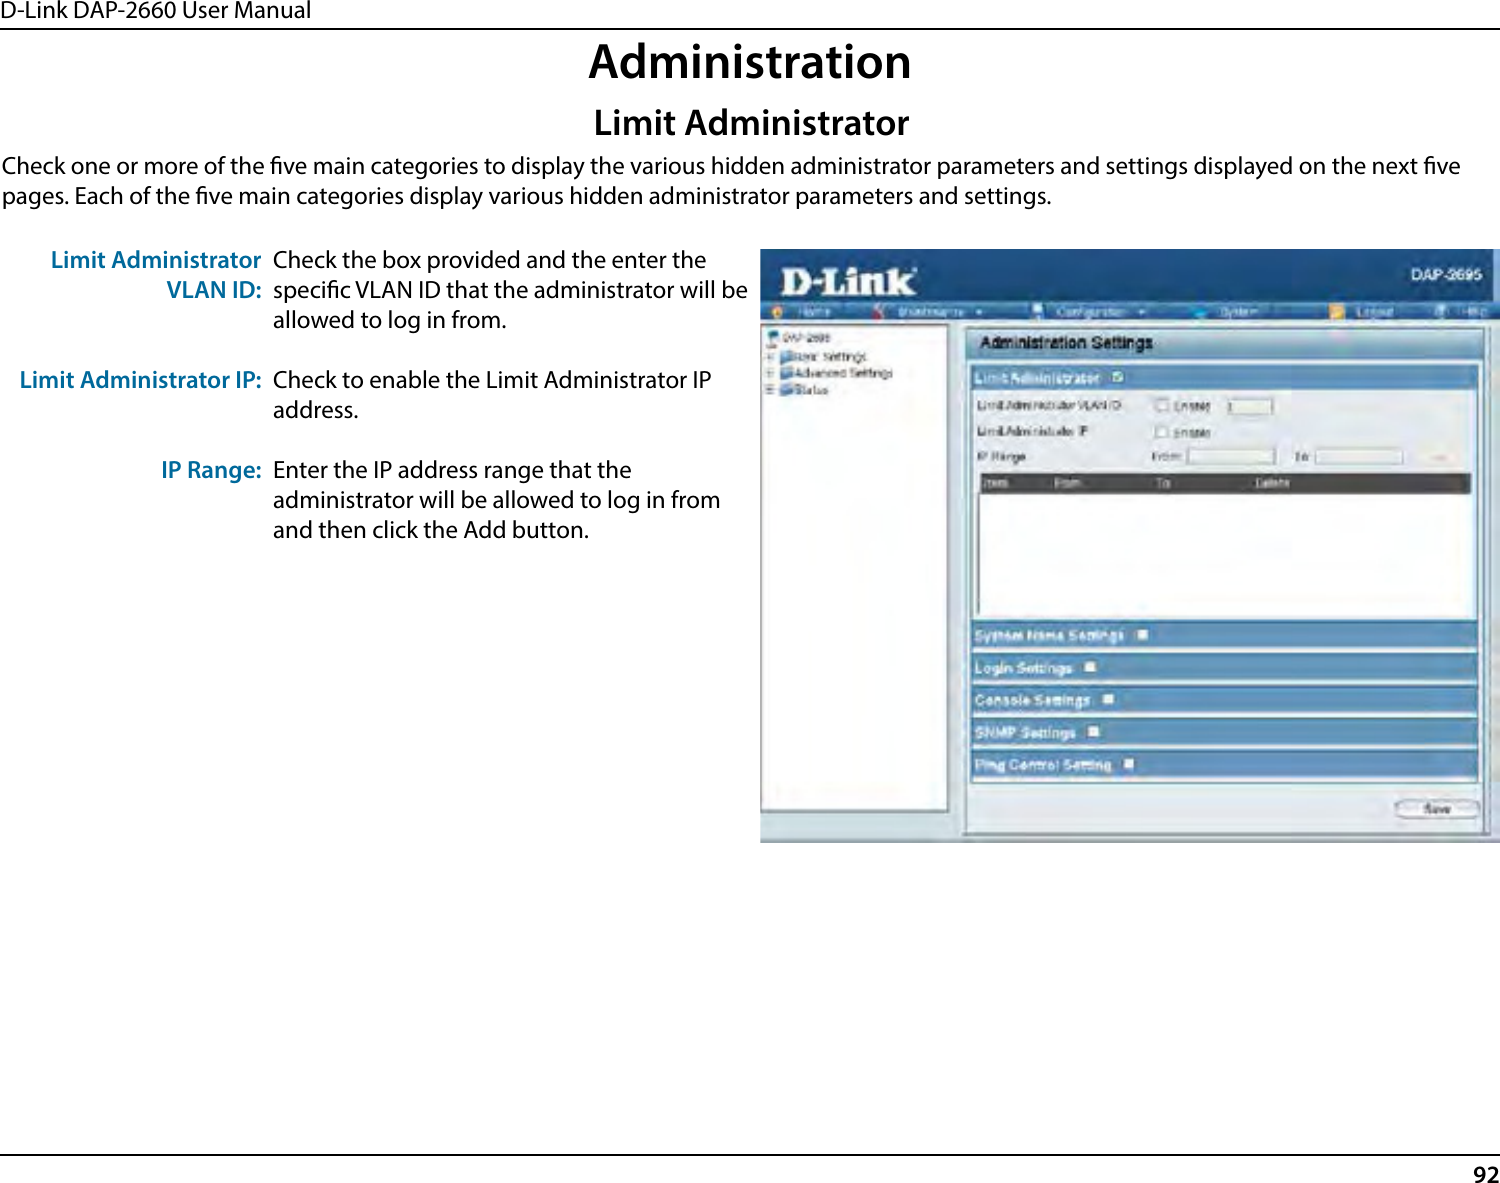 D-Link DAP-2660 User Manual92AdministrationCheck one or more of the ve main categories to display the various hidden administrator parameters and settings displayed on the next ve pages. Each of the ve main categories display various hidden administrator parameters and settings.Limit Administrator VLAN ID:Limit Administrator IP:IP Range:Check the box provided and the enter the specic VLAN ID that the administrator will be allowed to log in from.Check to enable the Limit Administrator IP address.Enter the IP address range that the administrator will be allowed to log in from and then click the Add button.Limit Administrator